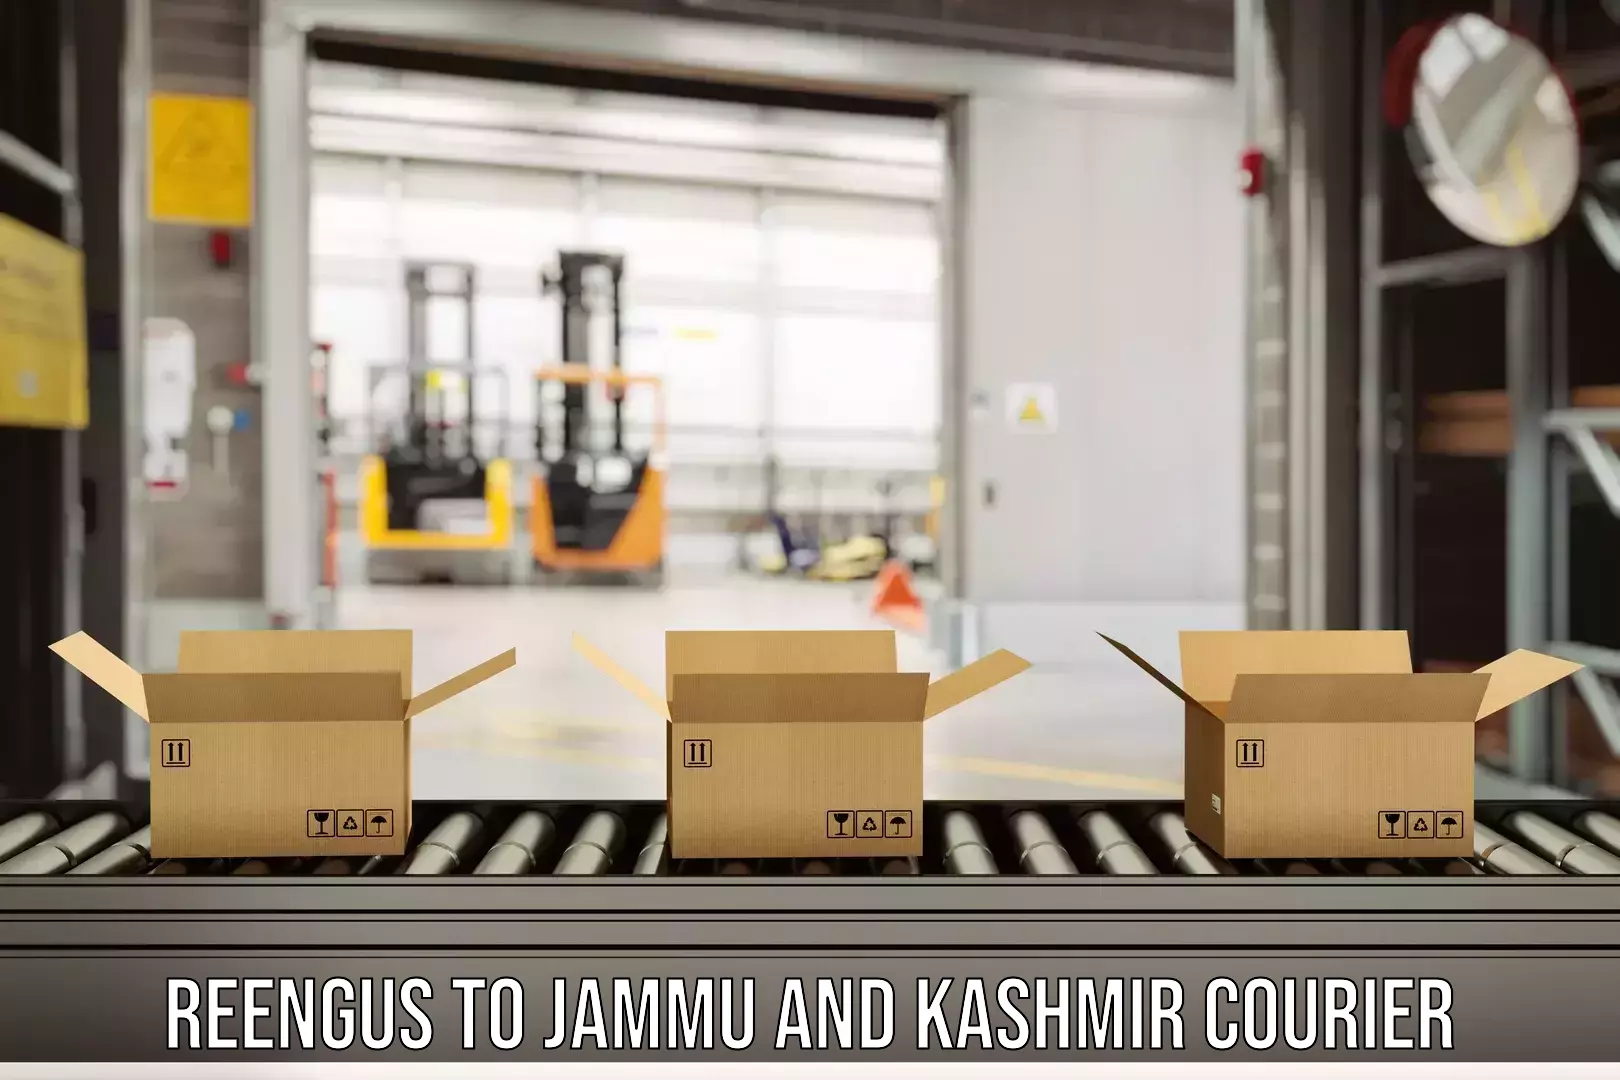 24/7 courier service Reengus to Jammu and Kashmir